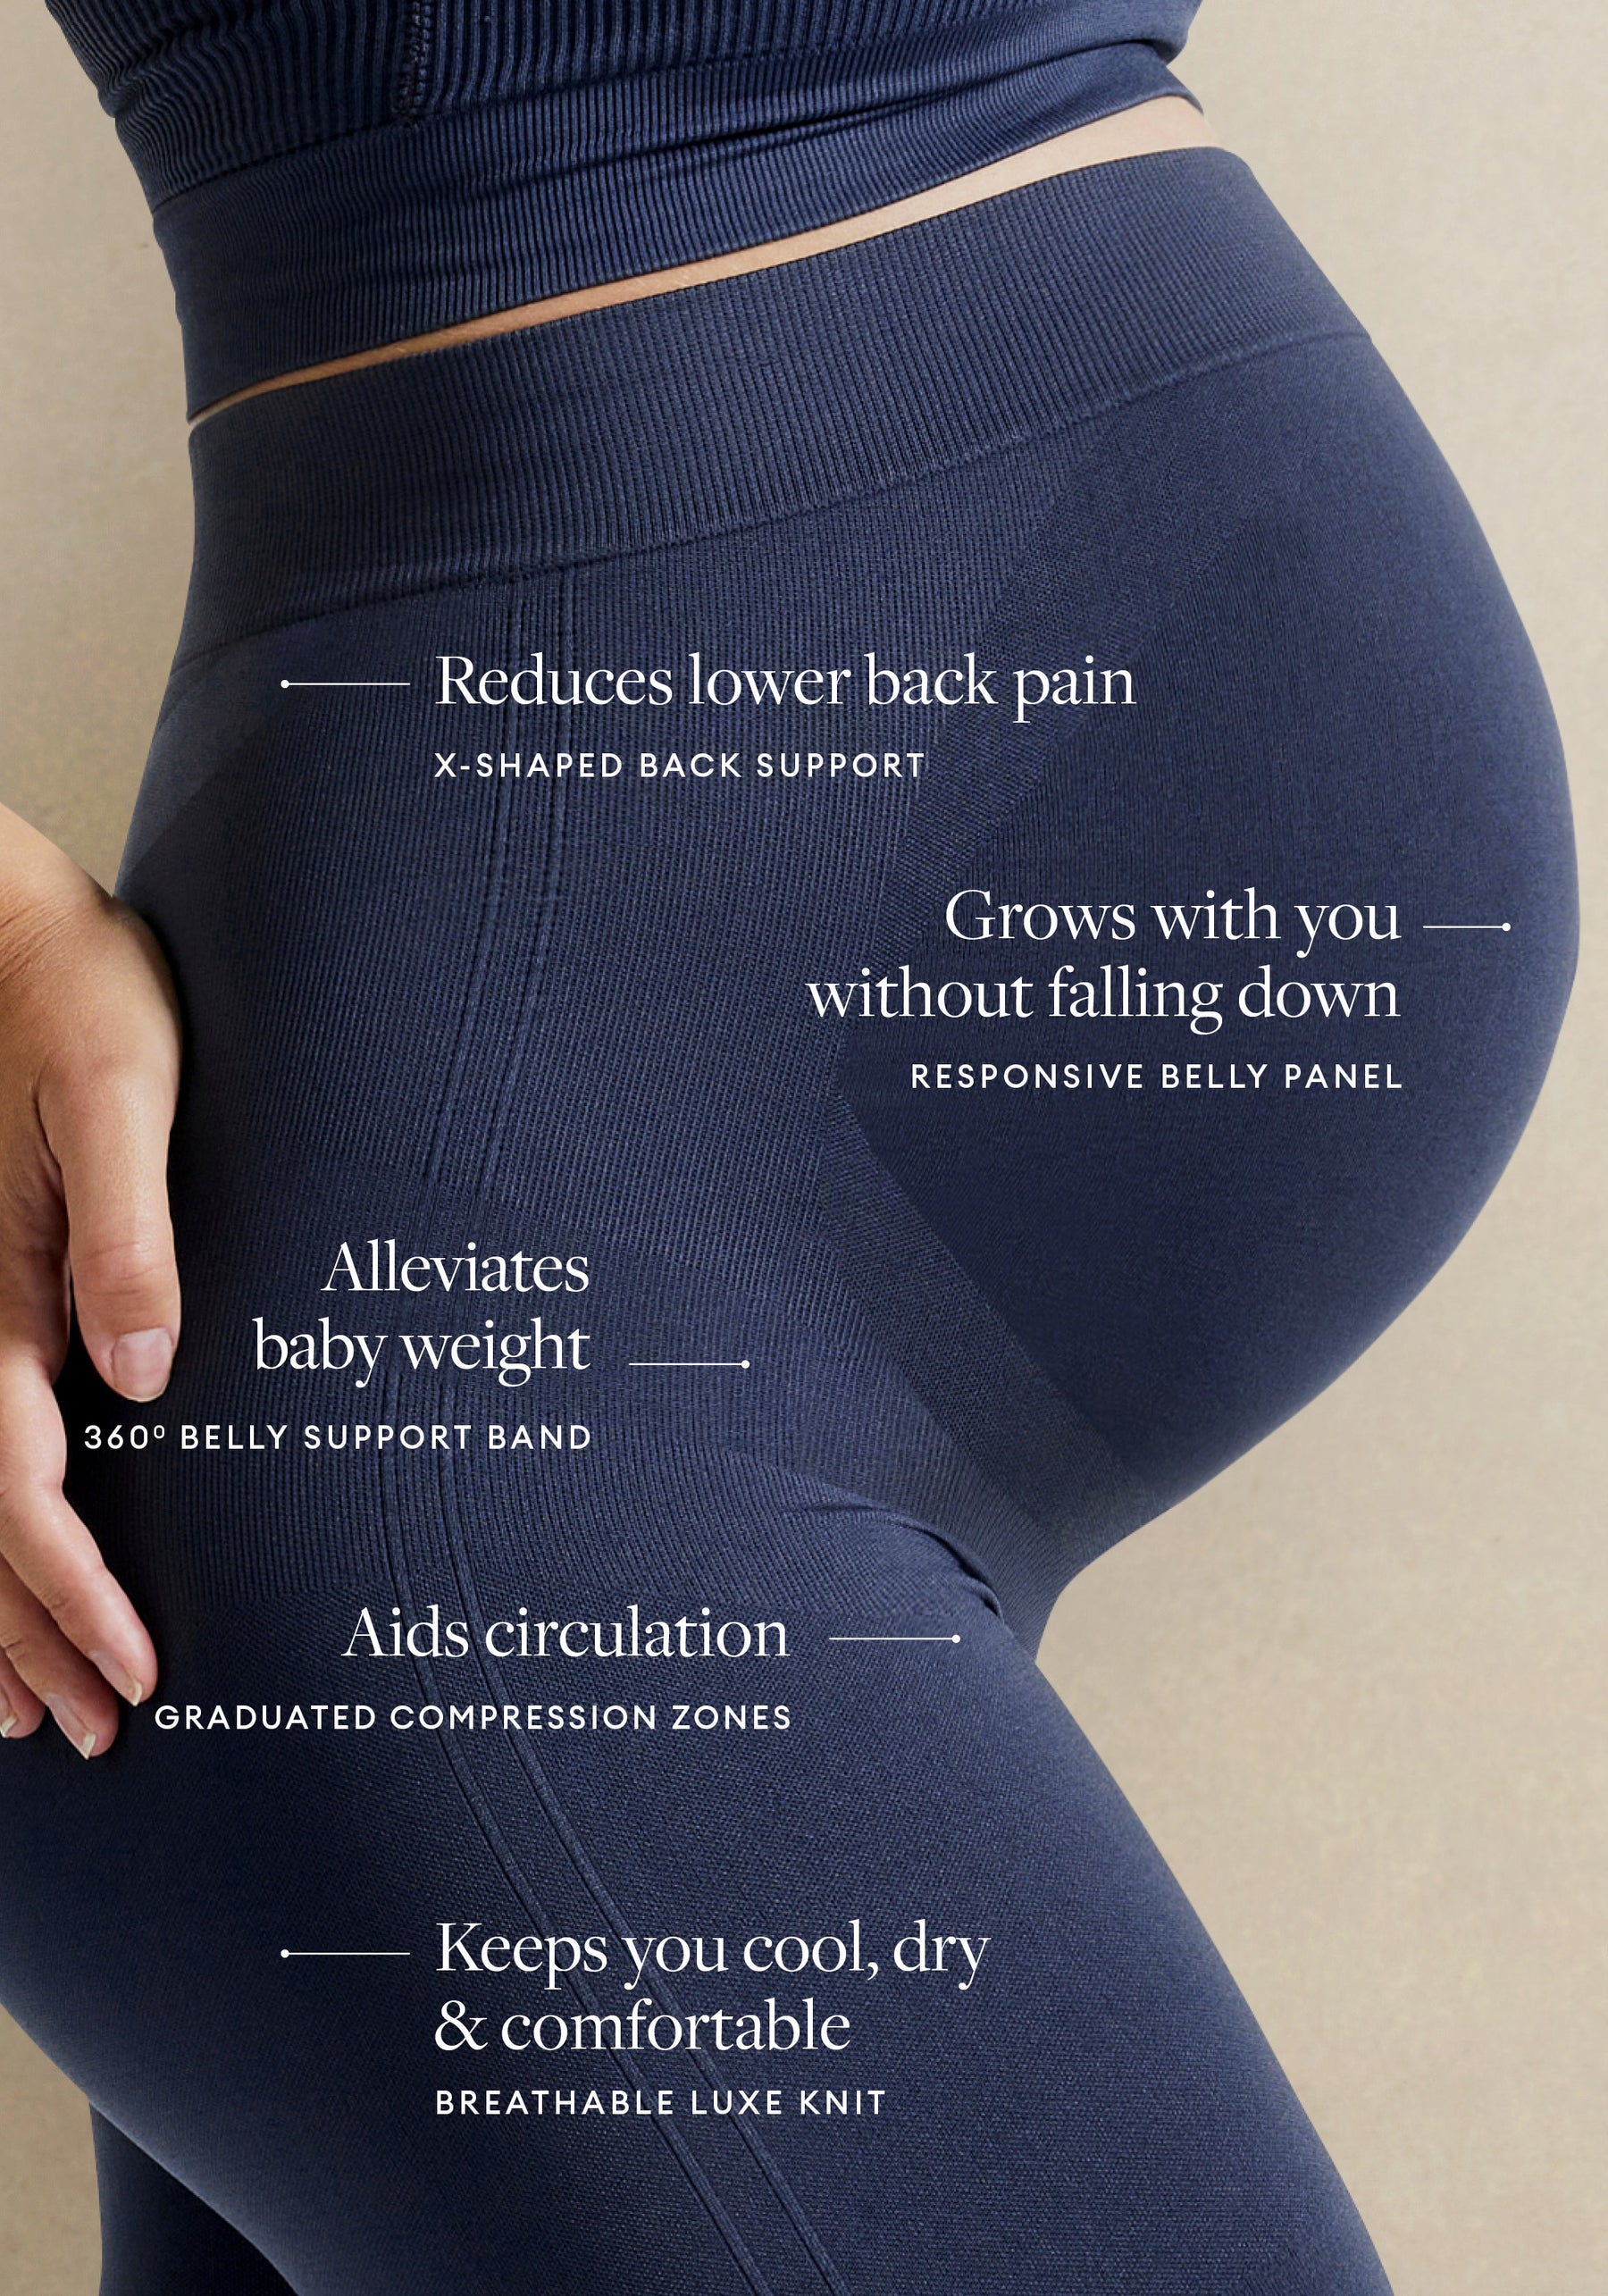 BLANQI EVERYDAY Maternity Belly Support Leggings